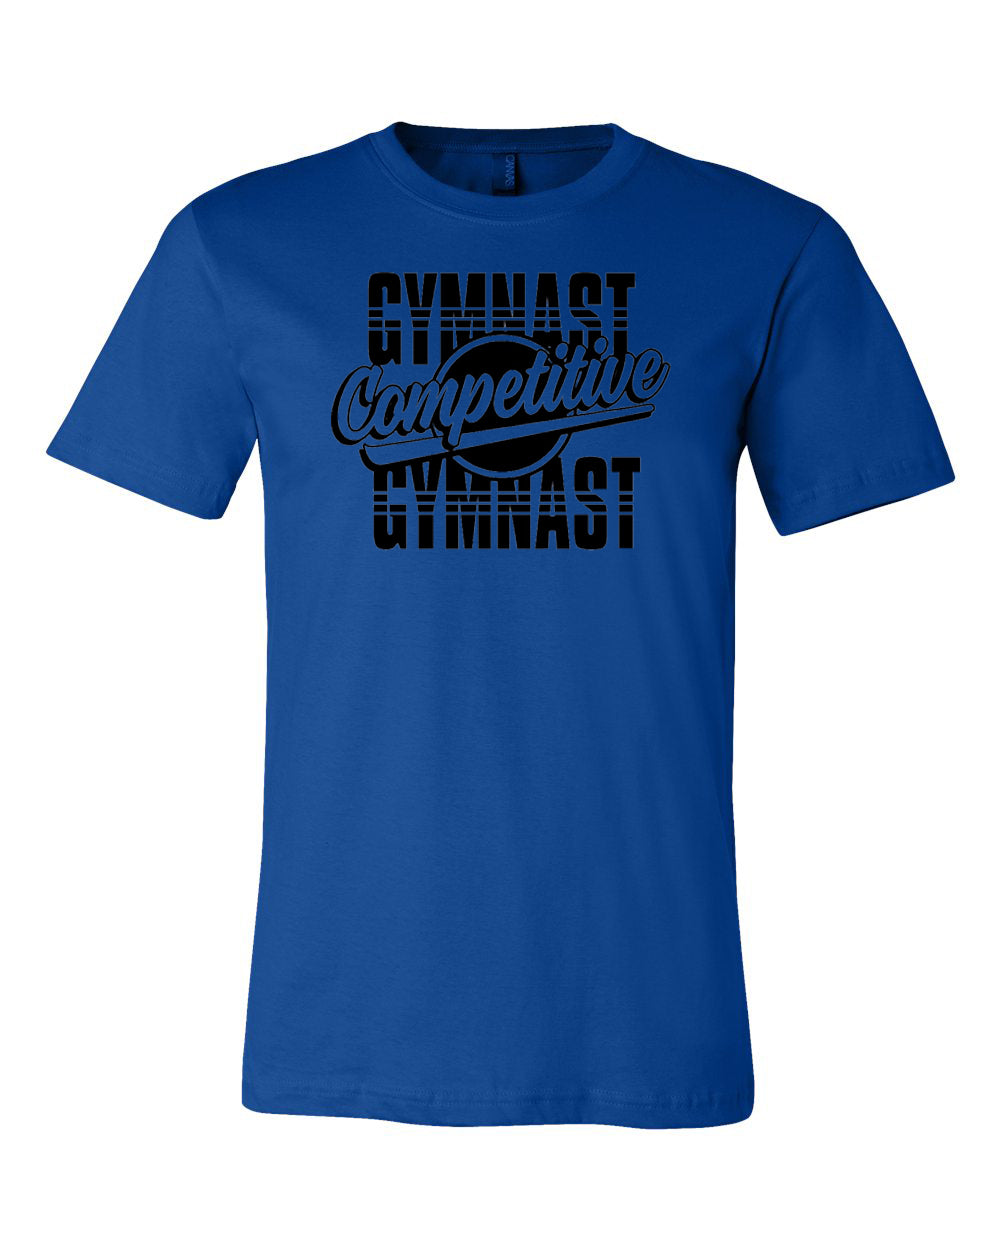 Competitive Gymnast Adult T-Shirt